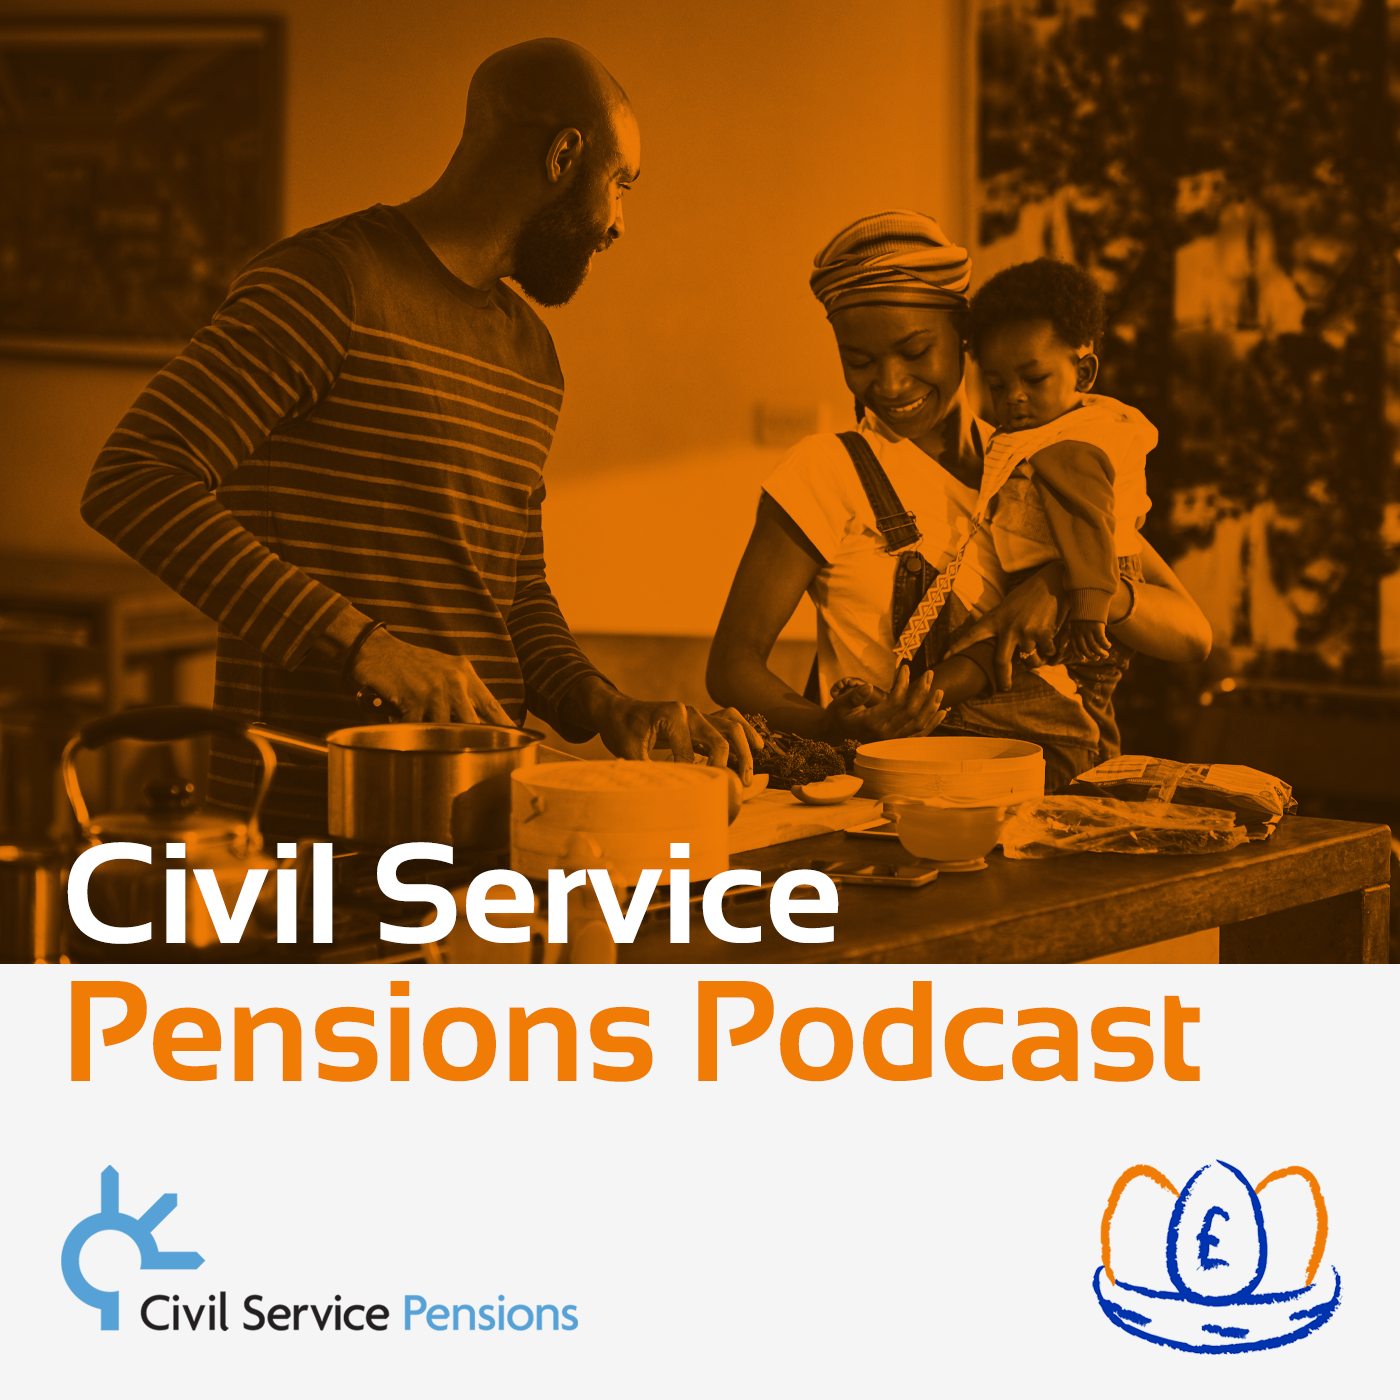 Leaving the Civil Service or opting out of your pension - what does it mean for your future?